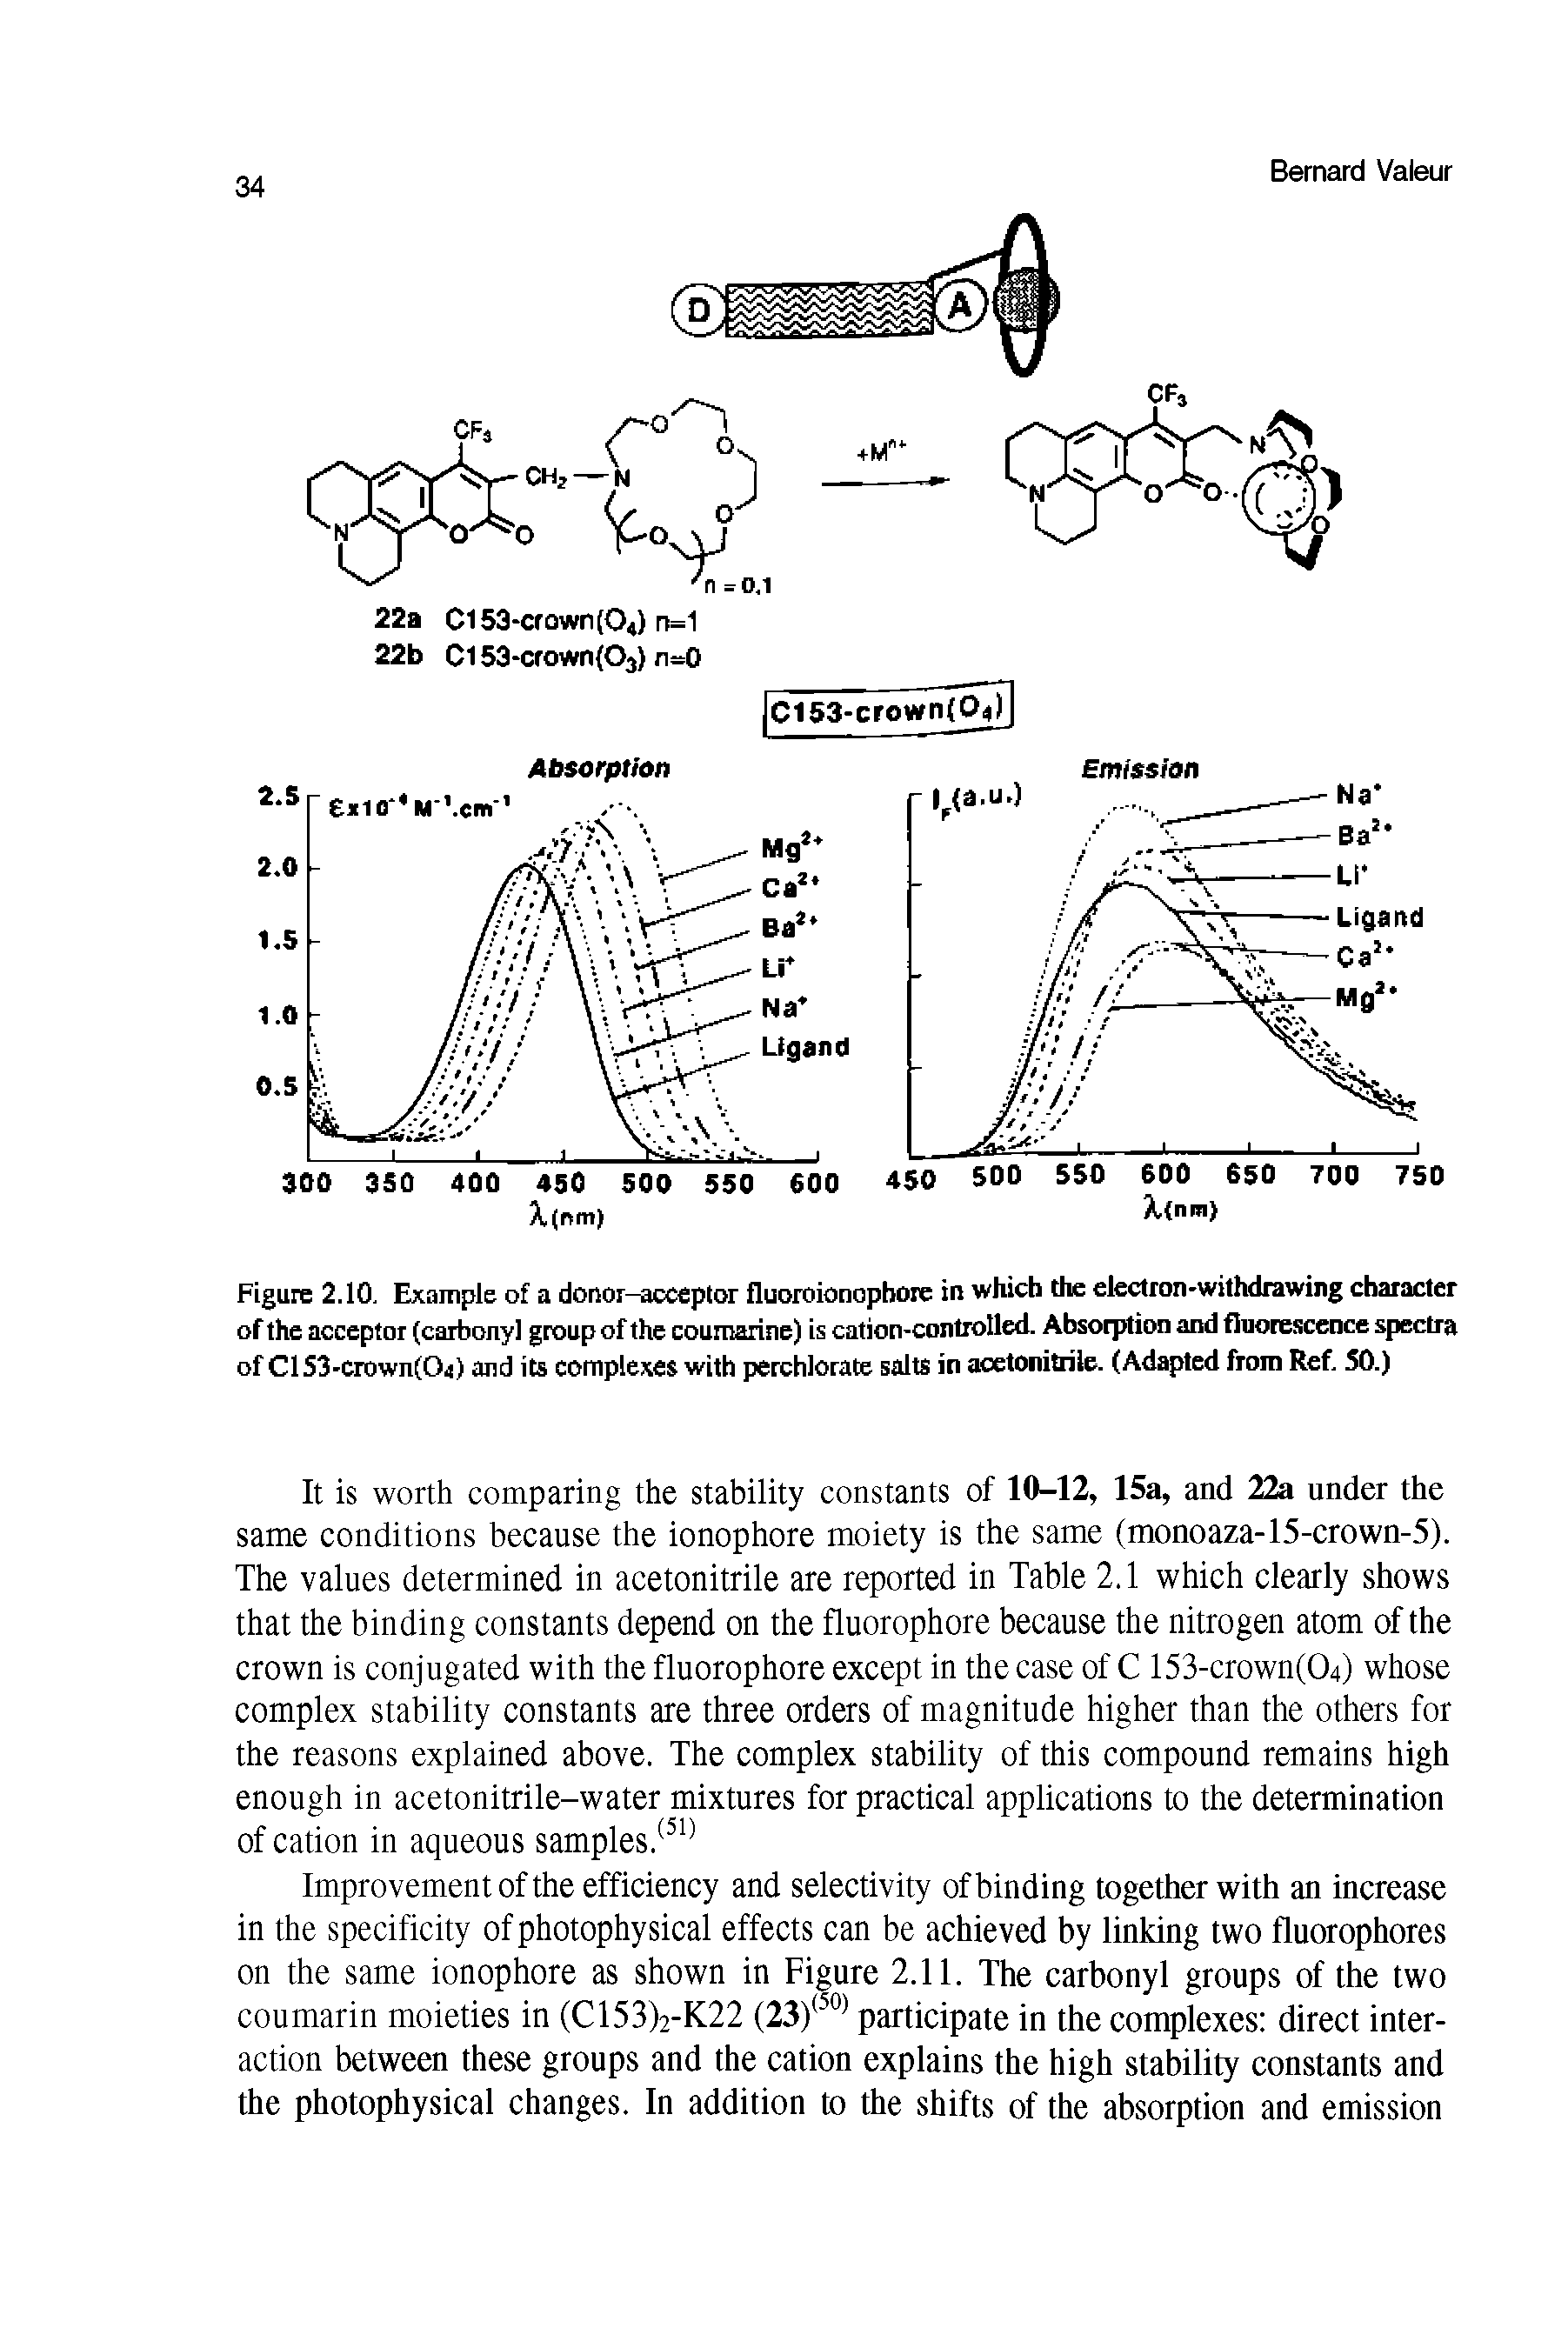 Figure 2.10. Example of a donor-acceptor fluoroionophore in which the electron-withdrawing character of the acceptor (carbonyl group of the coumarine) is cation-controlled. Absorption and fluorescence spectra of ClS3-crown(Oj) and its complexes with perchlorate salts in acetonitrile. (Adapted from Ref. SO.)...